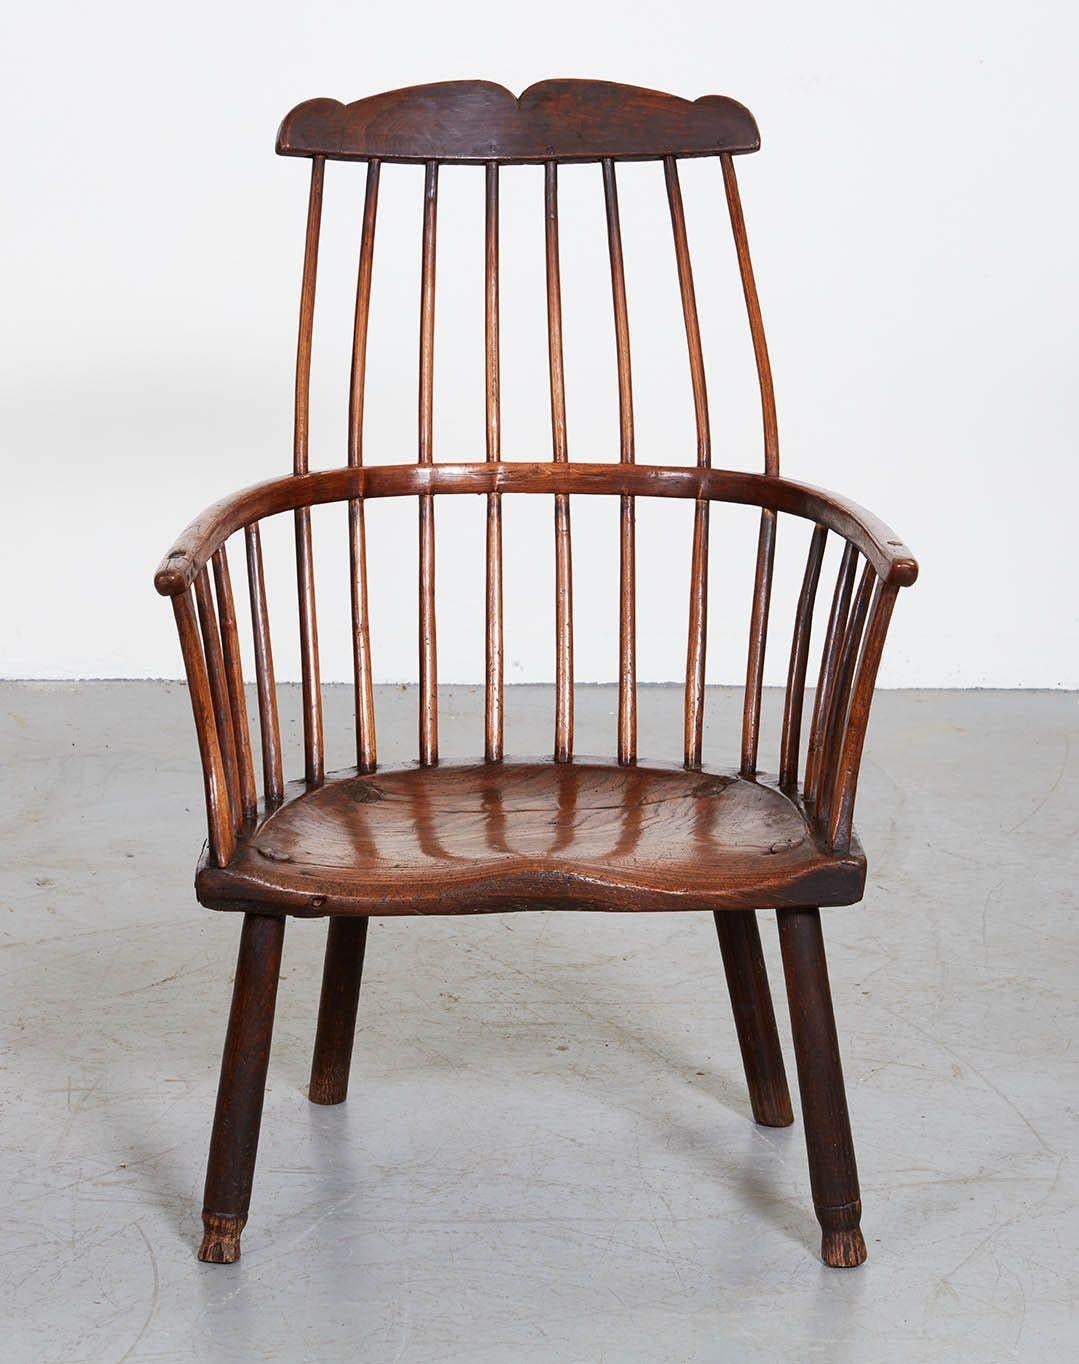 Very good English lobster pot Windsor chair, having shaped crest over shaved spindles with bent yew wood continuous arm over deeply saddled elm seat and standing on pole lathe turned legs, bearing owner's brand 